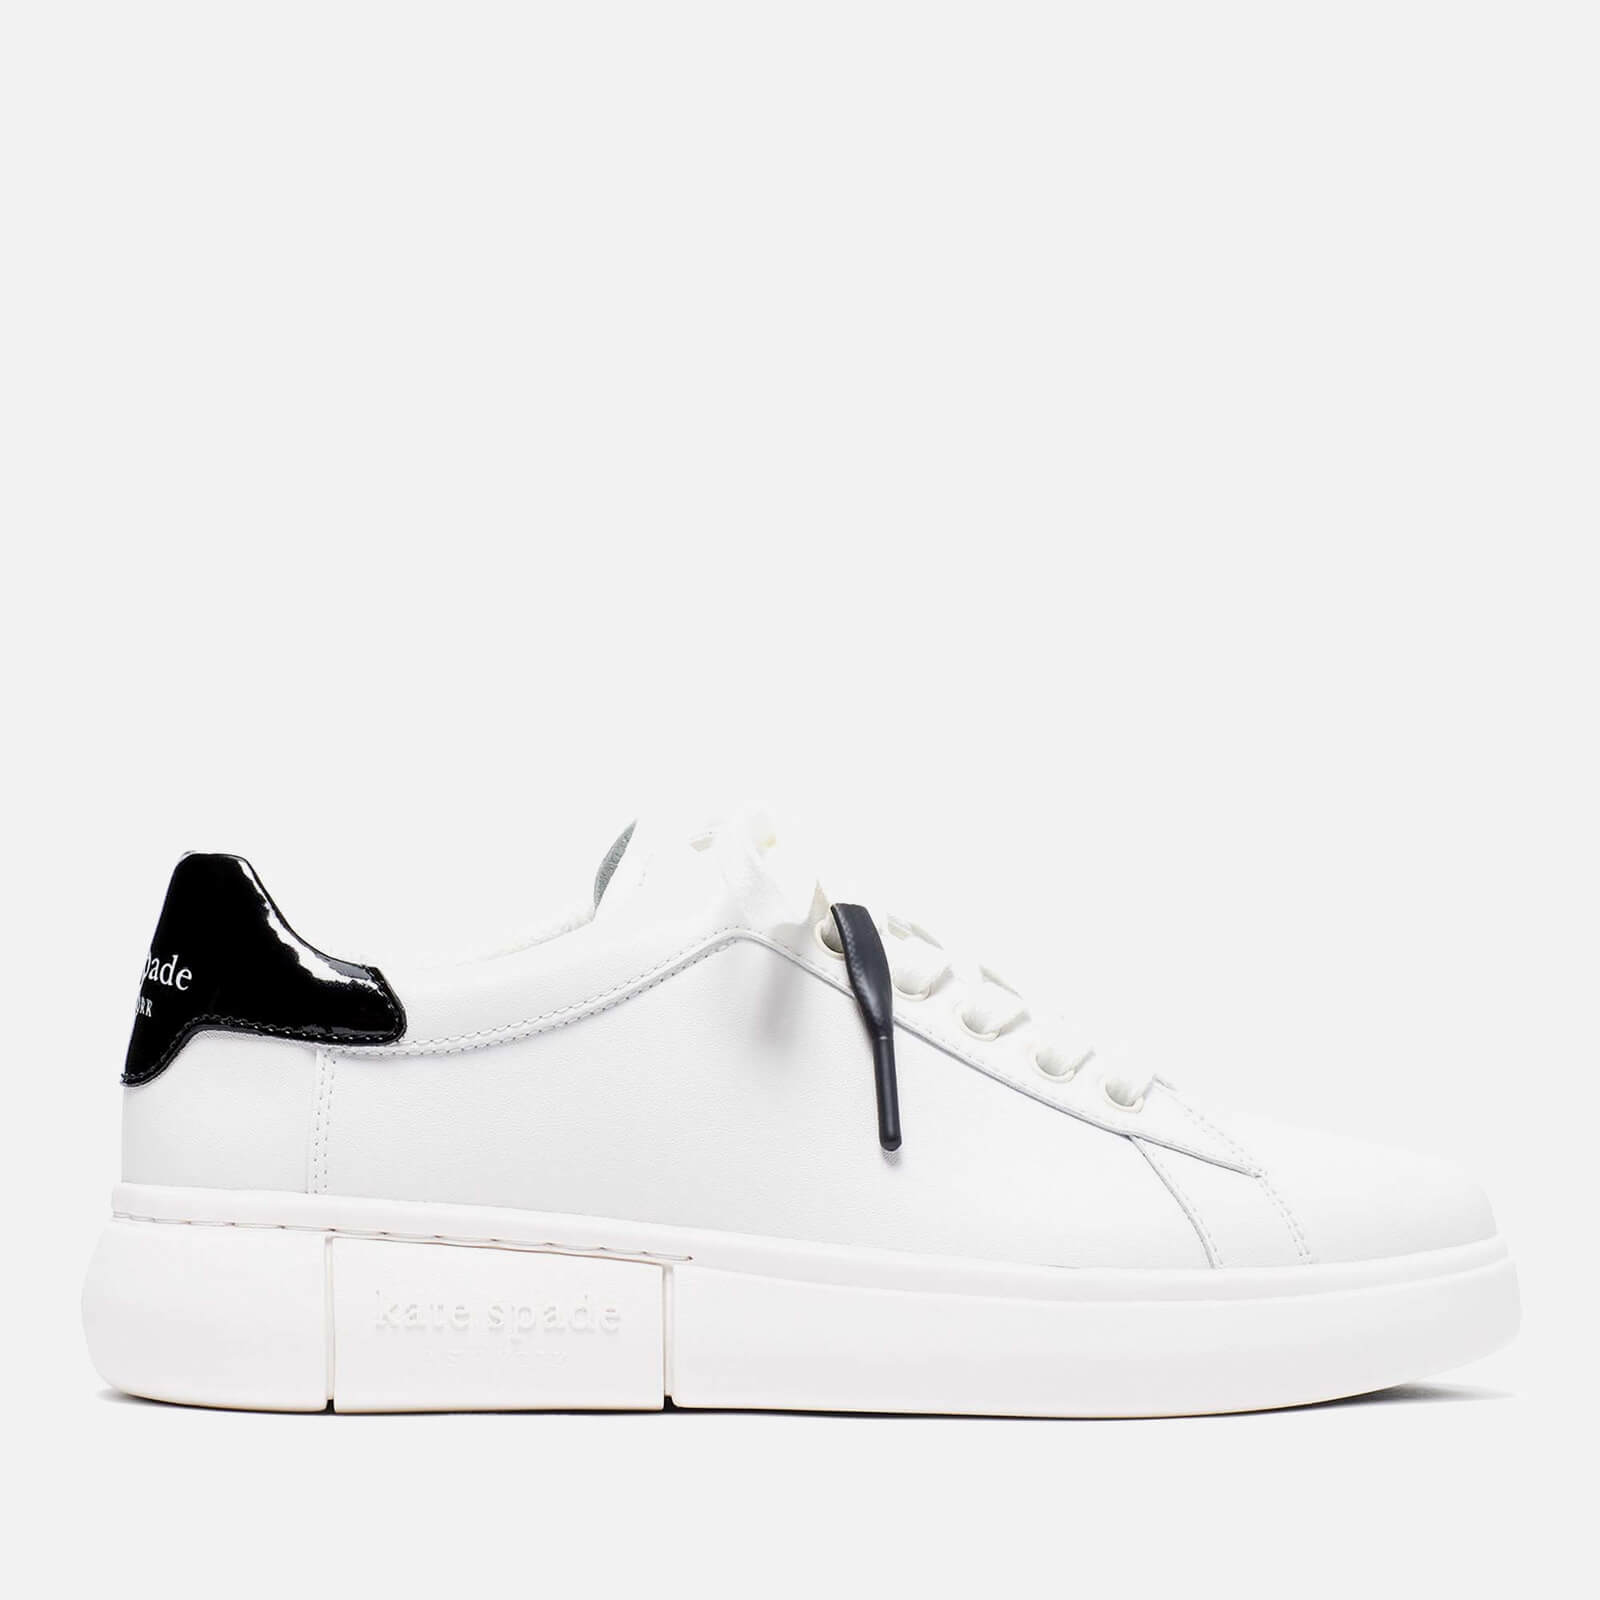 Kate Spade New York Women’s Lift Leather Trainers